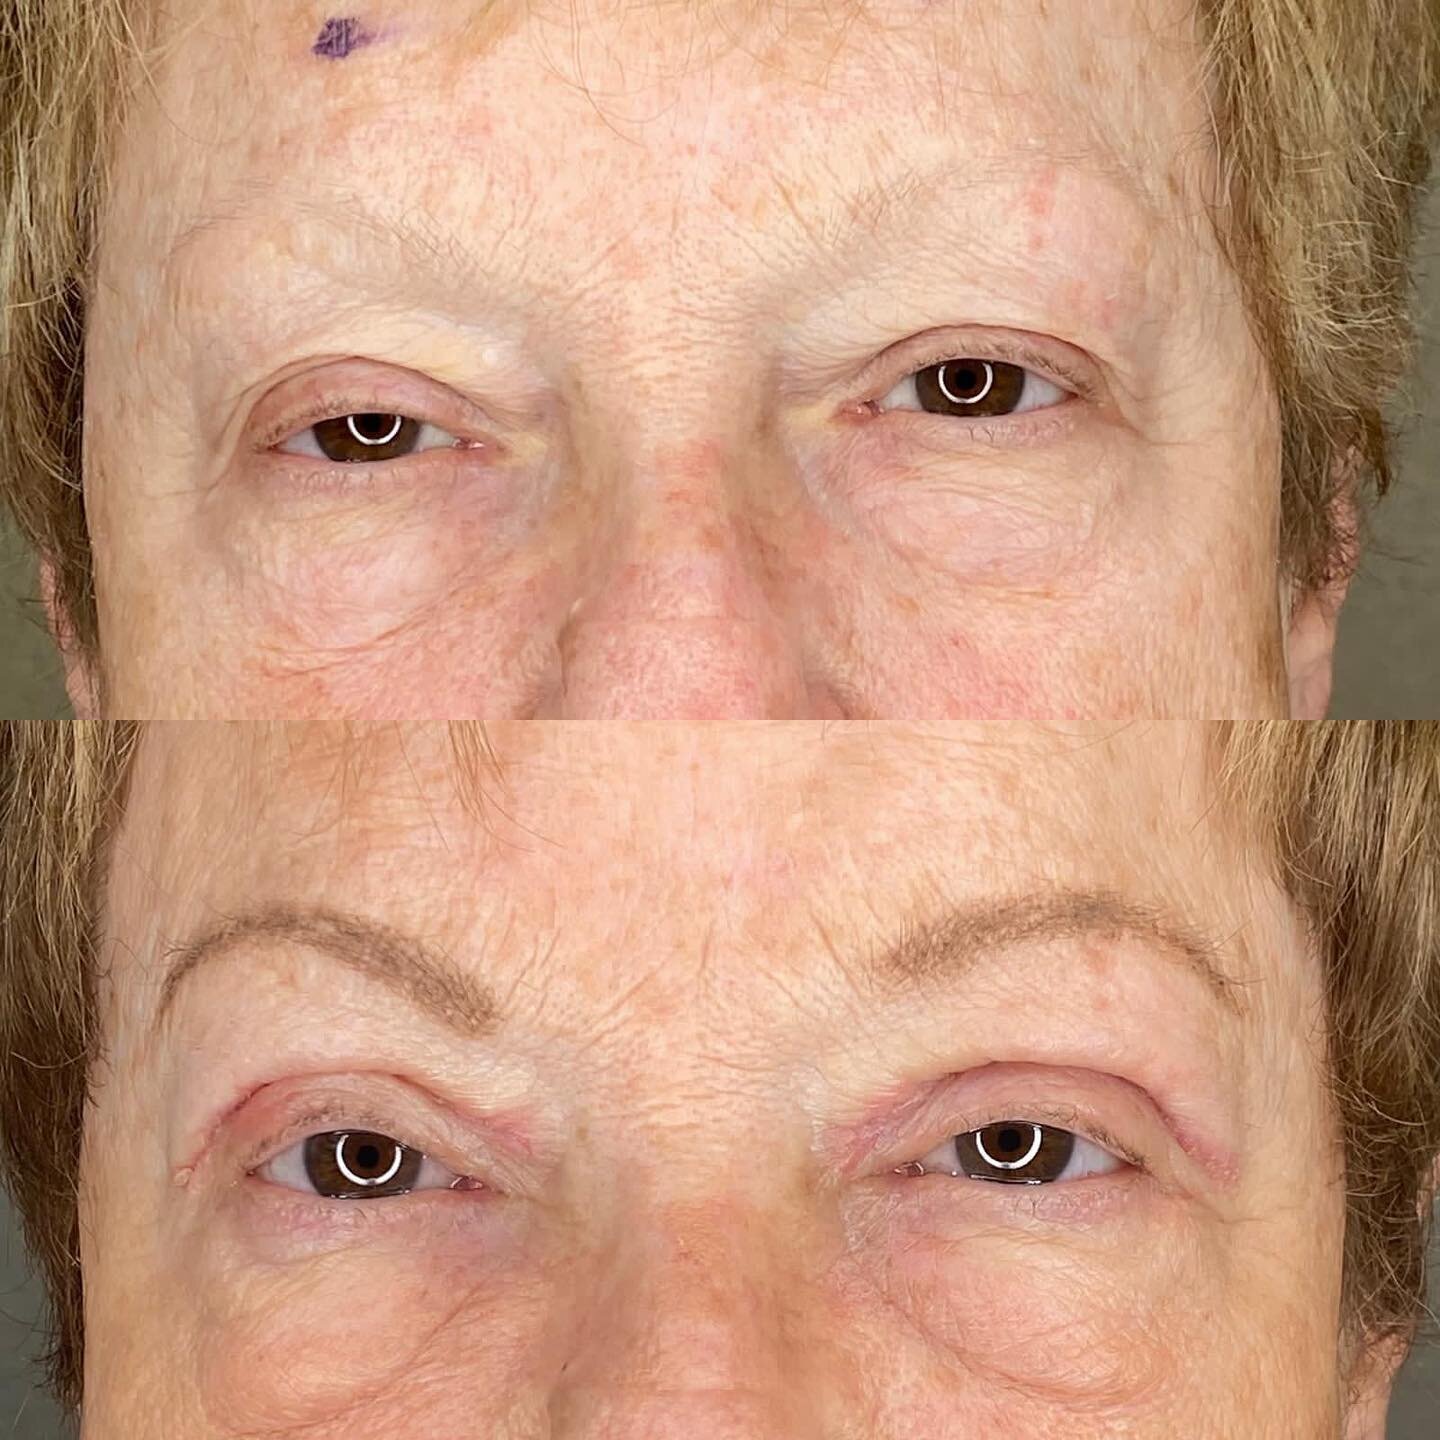 Right upper lid ptosis repair. One month after surgery at Perich Eye Center. Do you like the results? #transformationtuesday 

Dr. Tanya Perich 
Perich Eye Center
Main location and surgery center: 2020 Seven Springs Blvd. New Port Richey 34655, Fl.
⁠